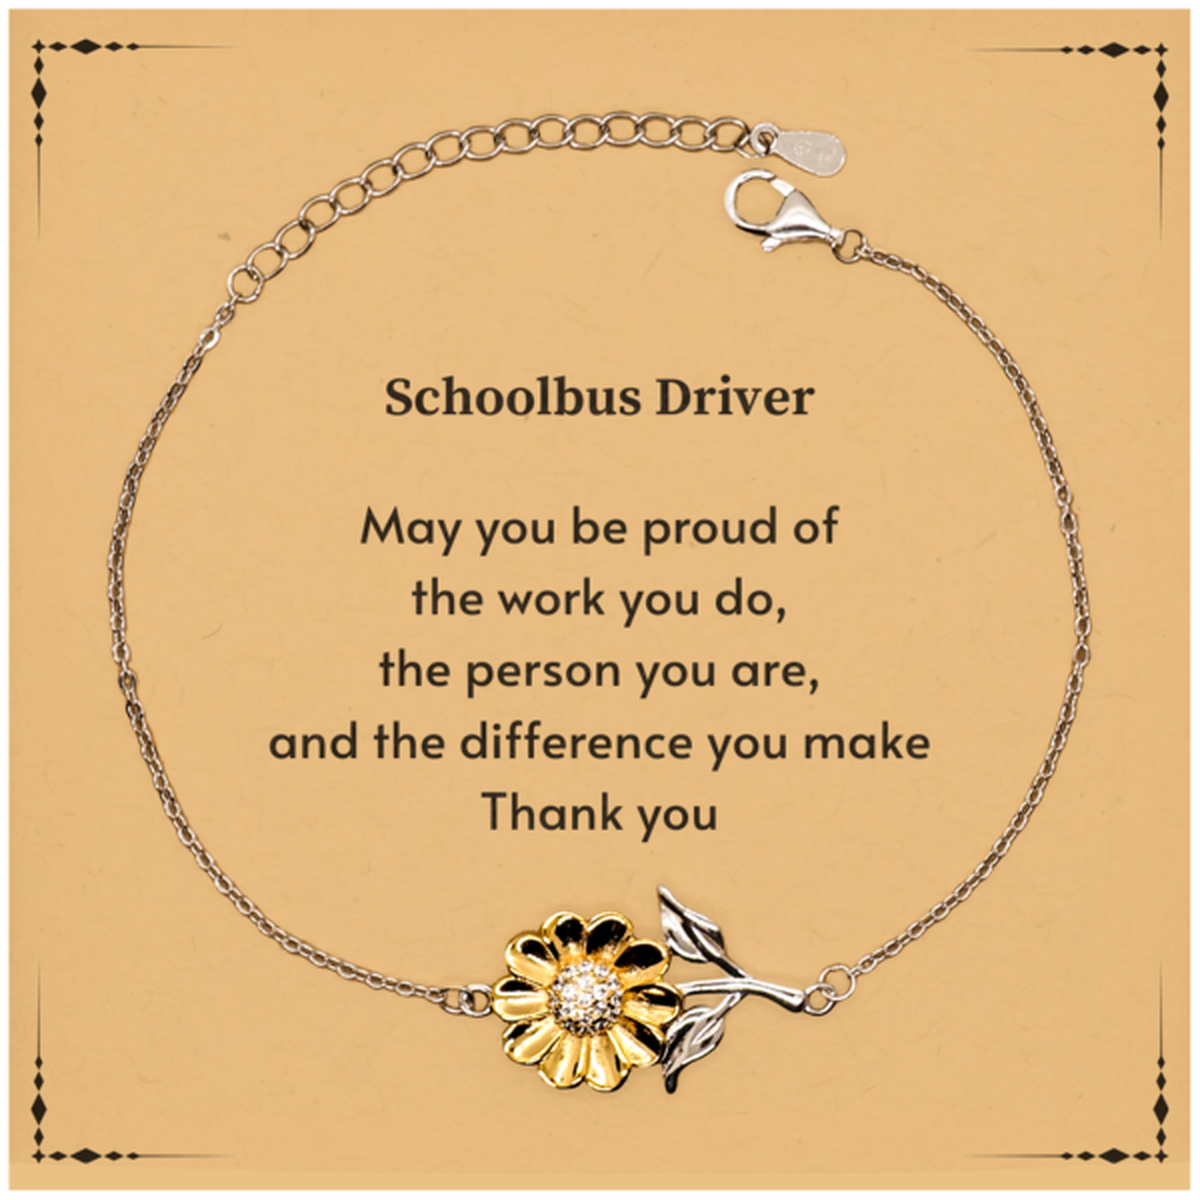 Heartwarming Sunflower Bracelet Retirement Coworkers Gifts for Schoolbus Driver, Schoolbus Driver May You be proud of the work you do, the person you are Gifts for Boss Men Women Friends